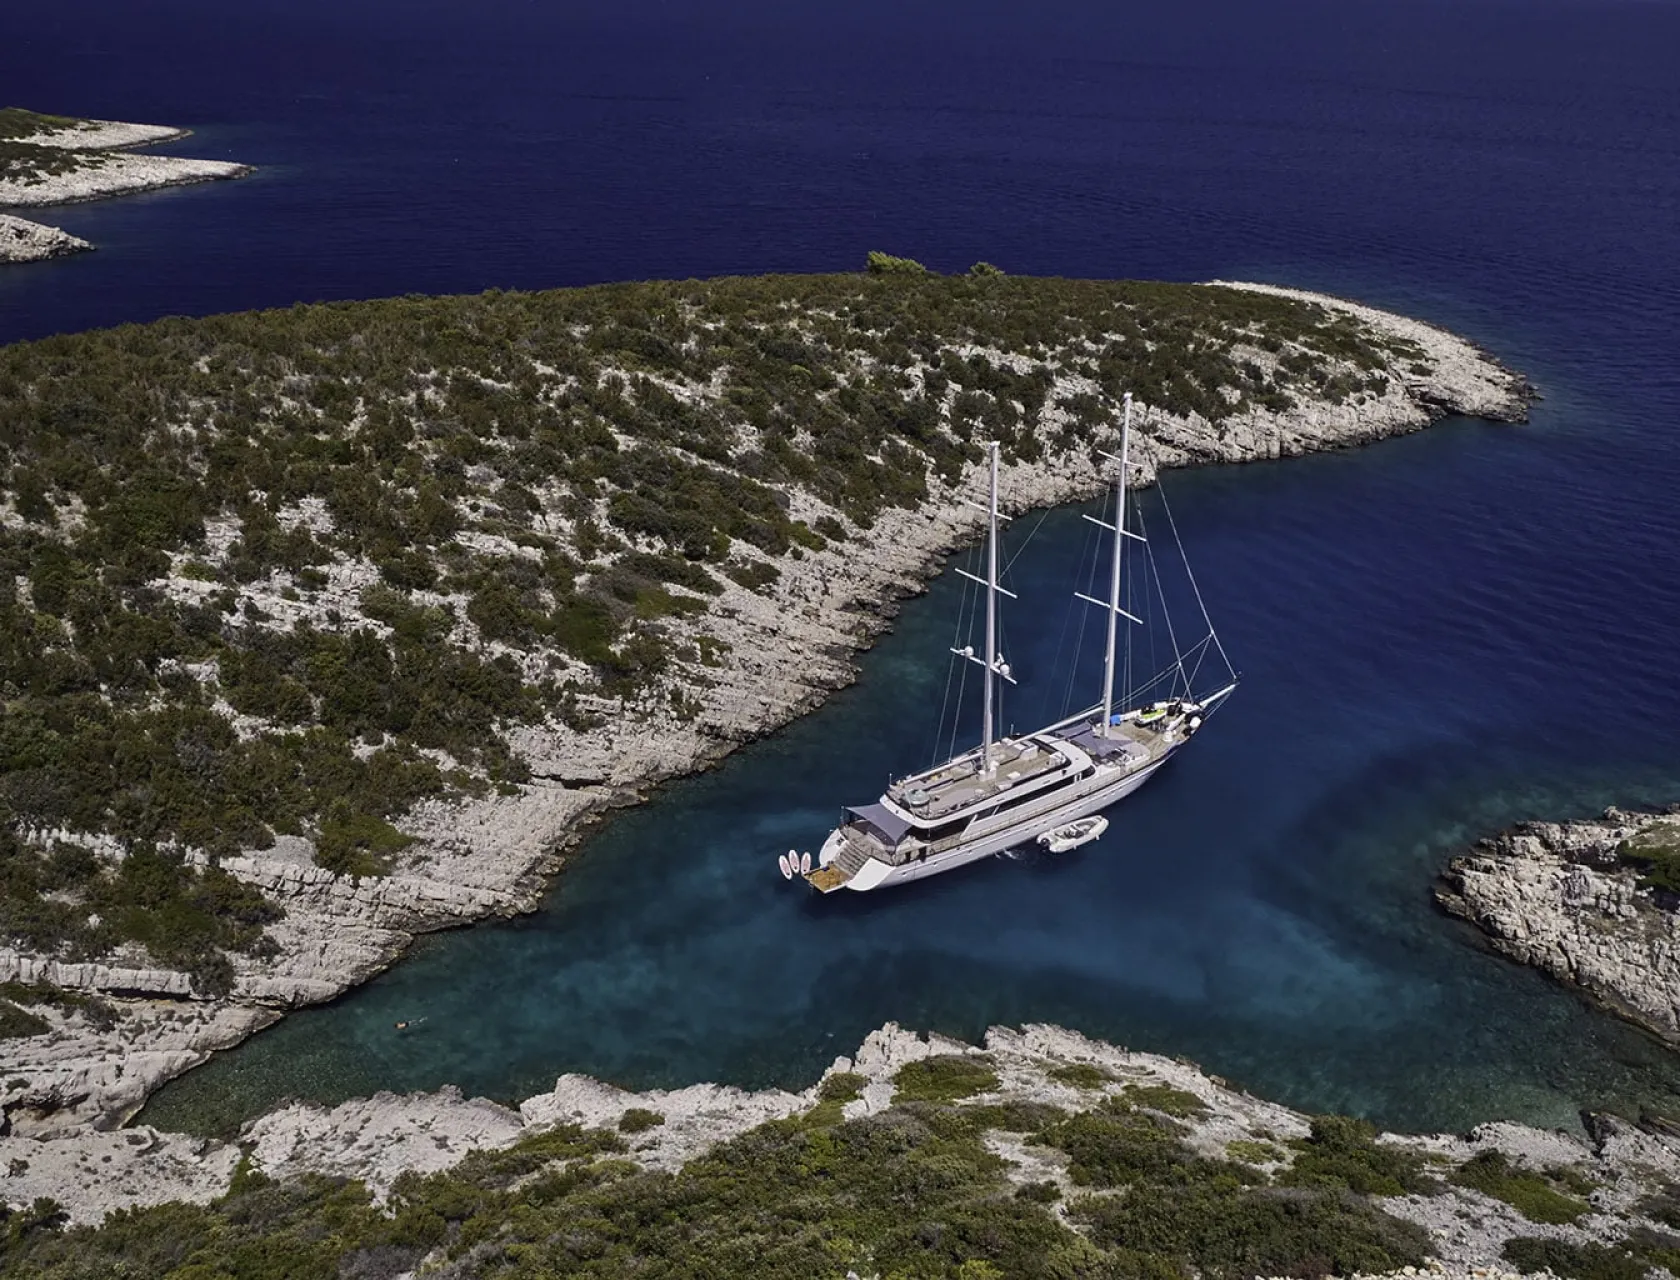 Book your dream yacht charter holiday in 2022